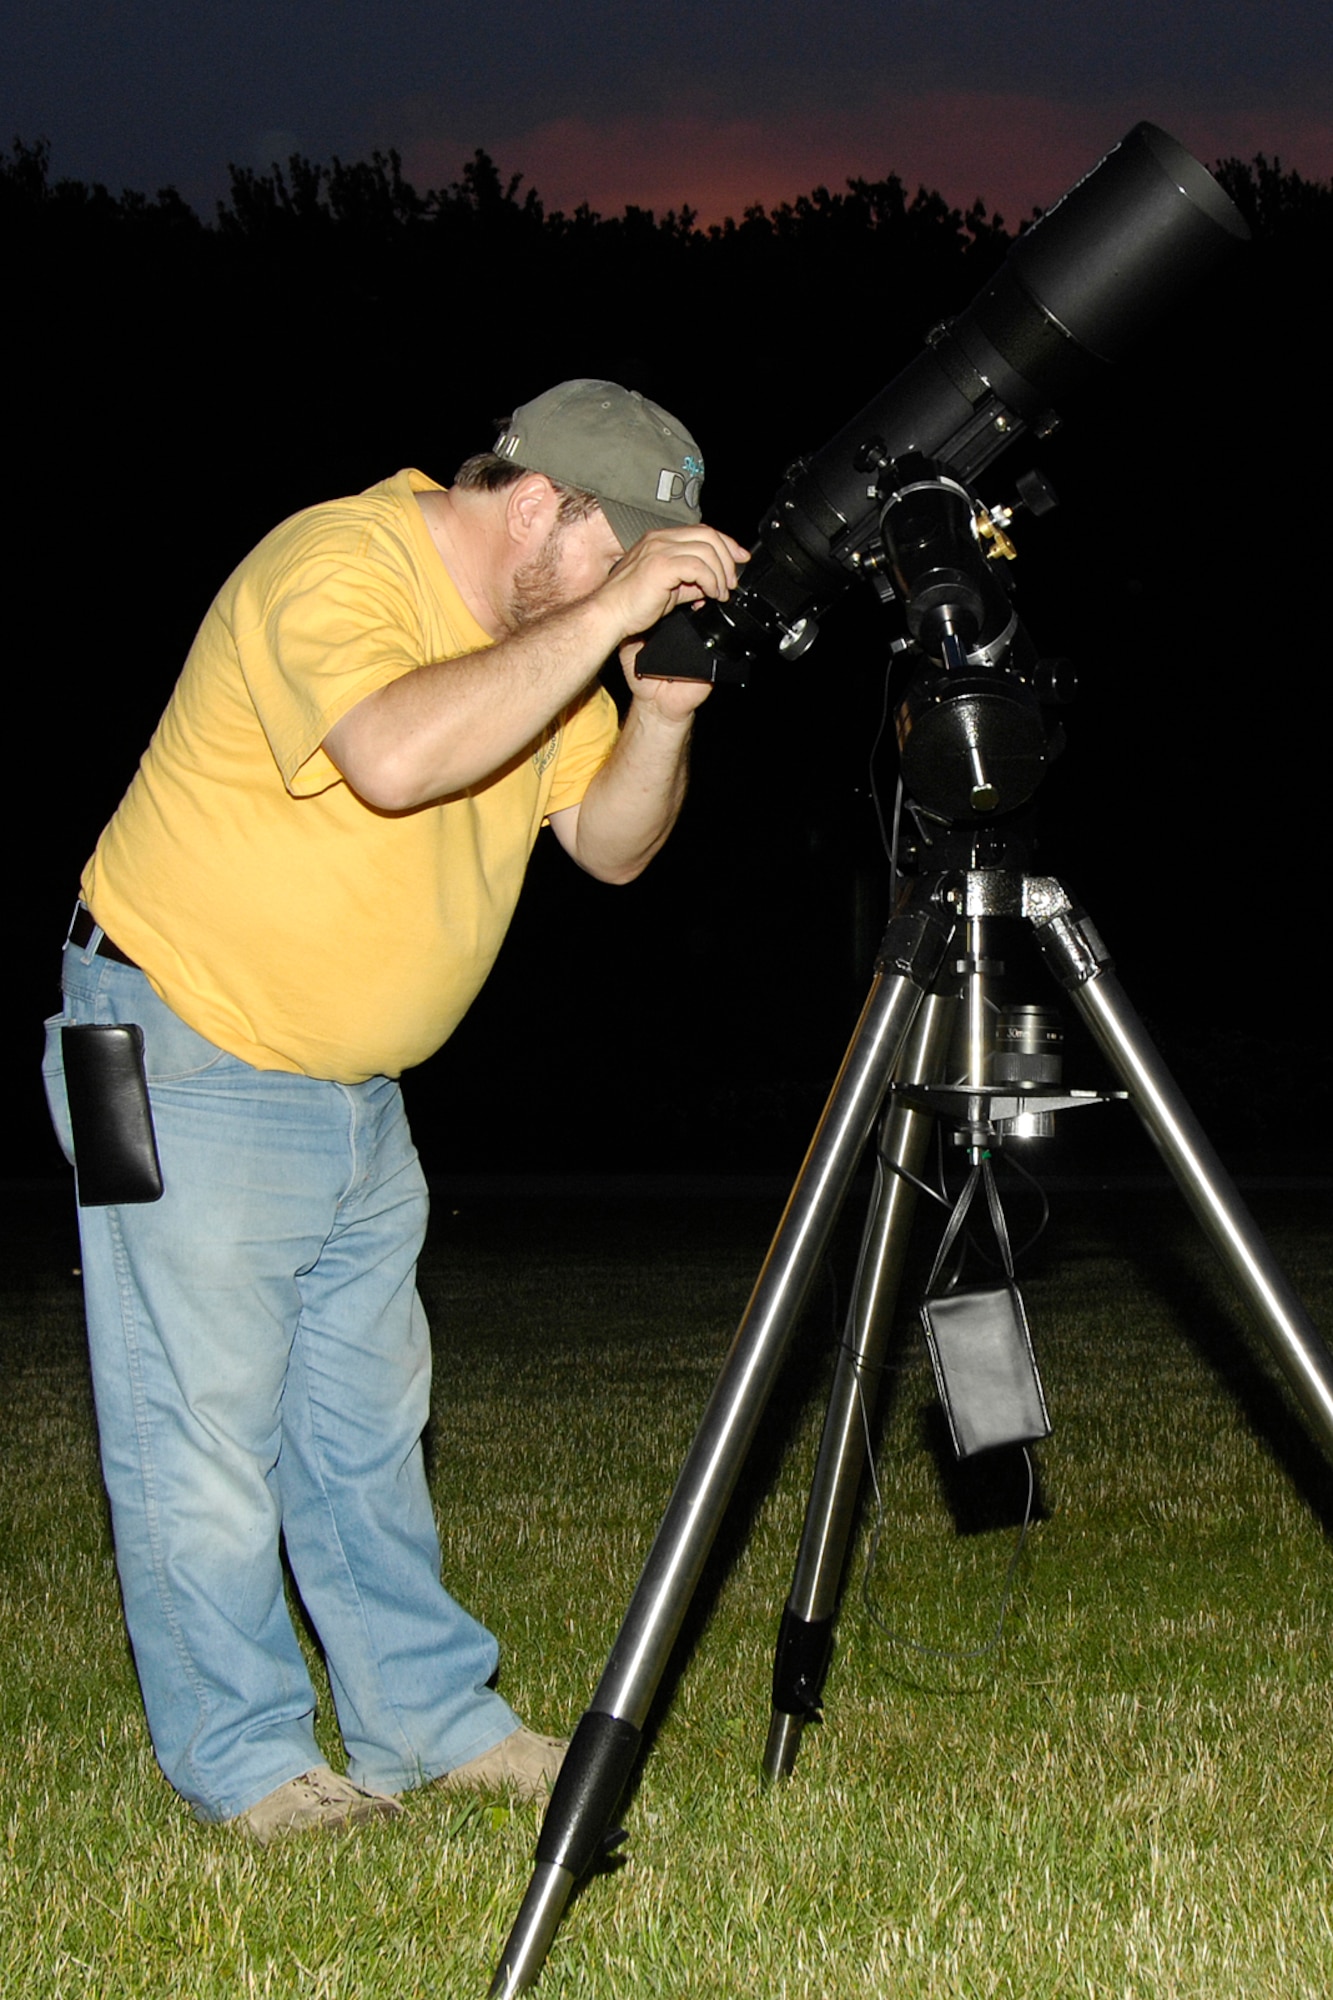 HANSCOM AFB, Mass. -- John Maher, member of the Boston Amateur Telescope Makers club, takes a look through a telescope during Astronomy Night June 7. The event, which began at the Youth Center, helped participants learn about the universe by holding and examining real meteorites and looking through telescopes to see craters on the moon, Saturn’s rings, distant star clusters and galaxies and quasars. (U.S. Air Force photo by Linda LaBonte Britt)